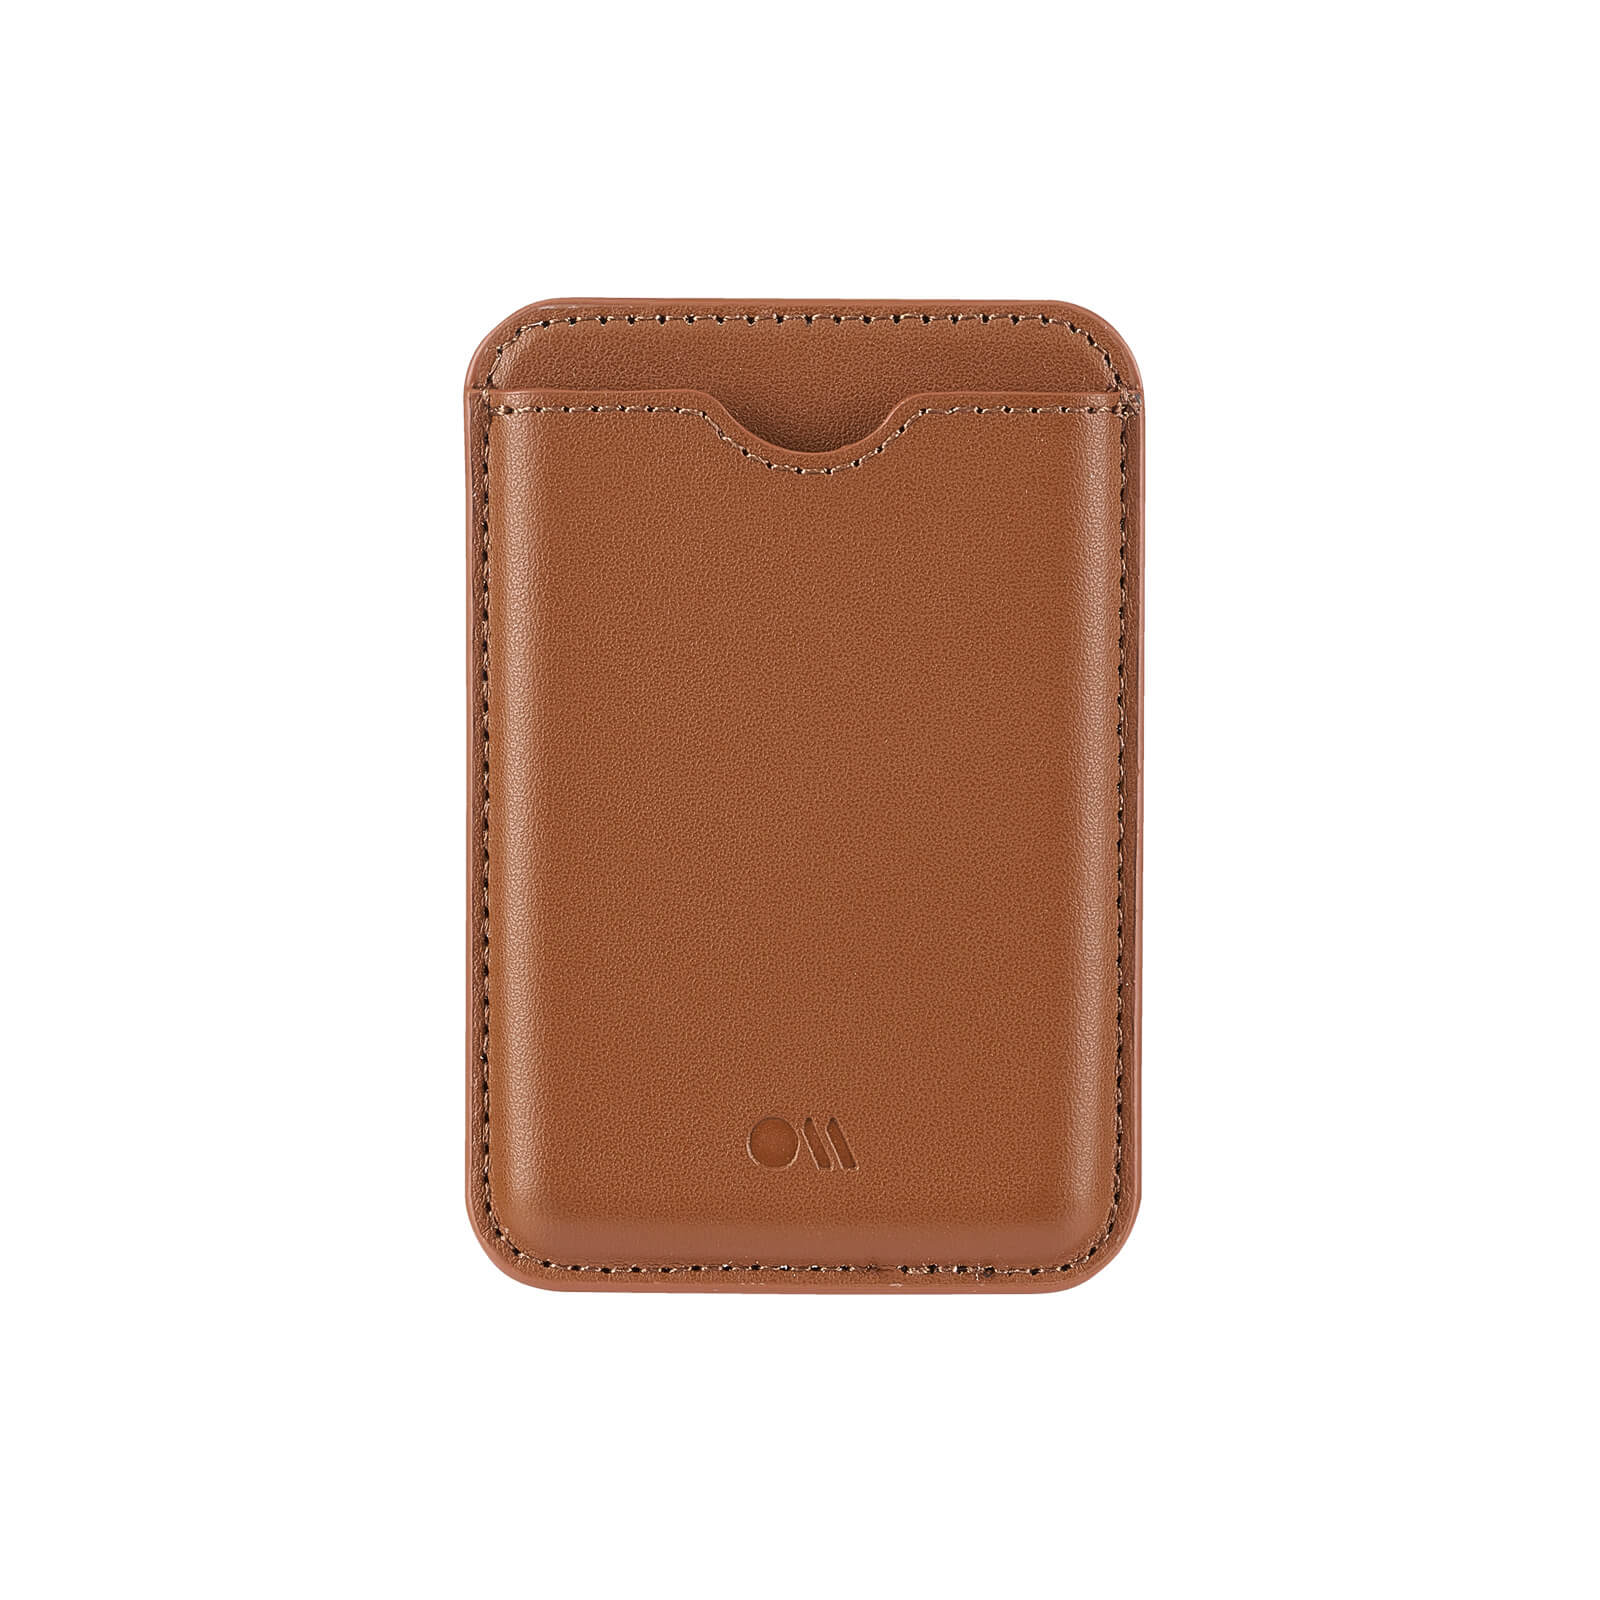 Holds up to three cards or cash. color::Cognac